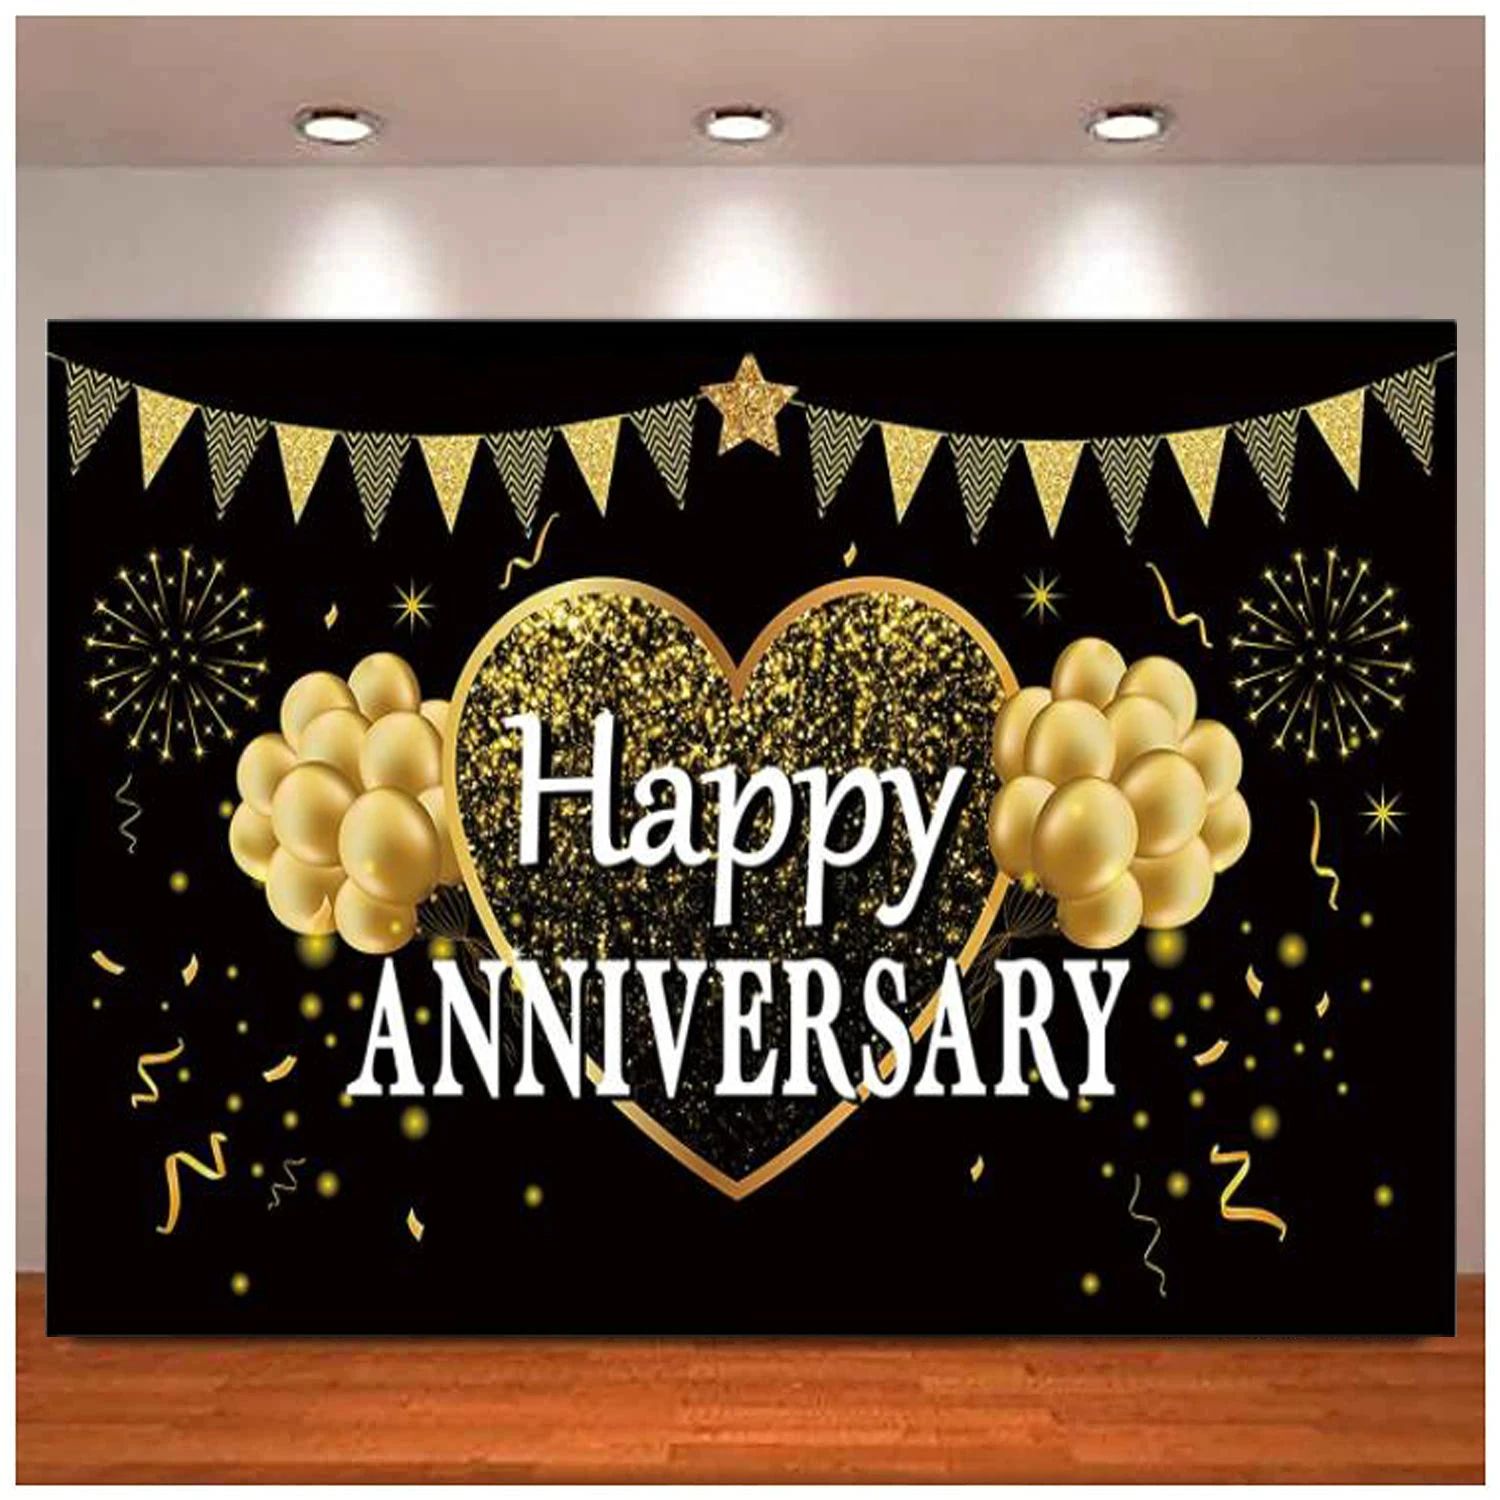 

Happy Anniversay Party Backdrop Banner Black Gold Supplies Large Yard Sign Backgroud For Indoor And Outdoor Party Decoration